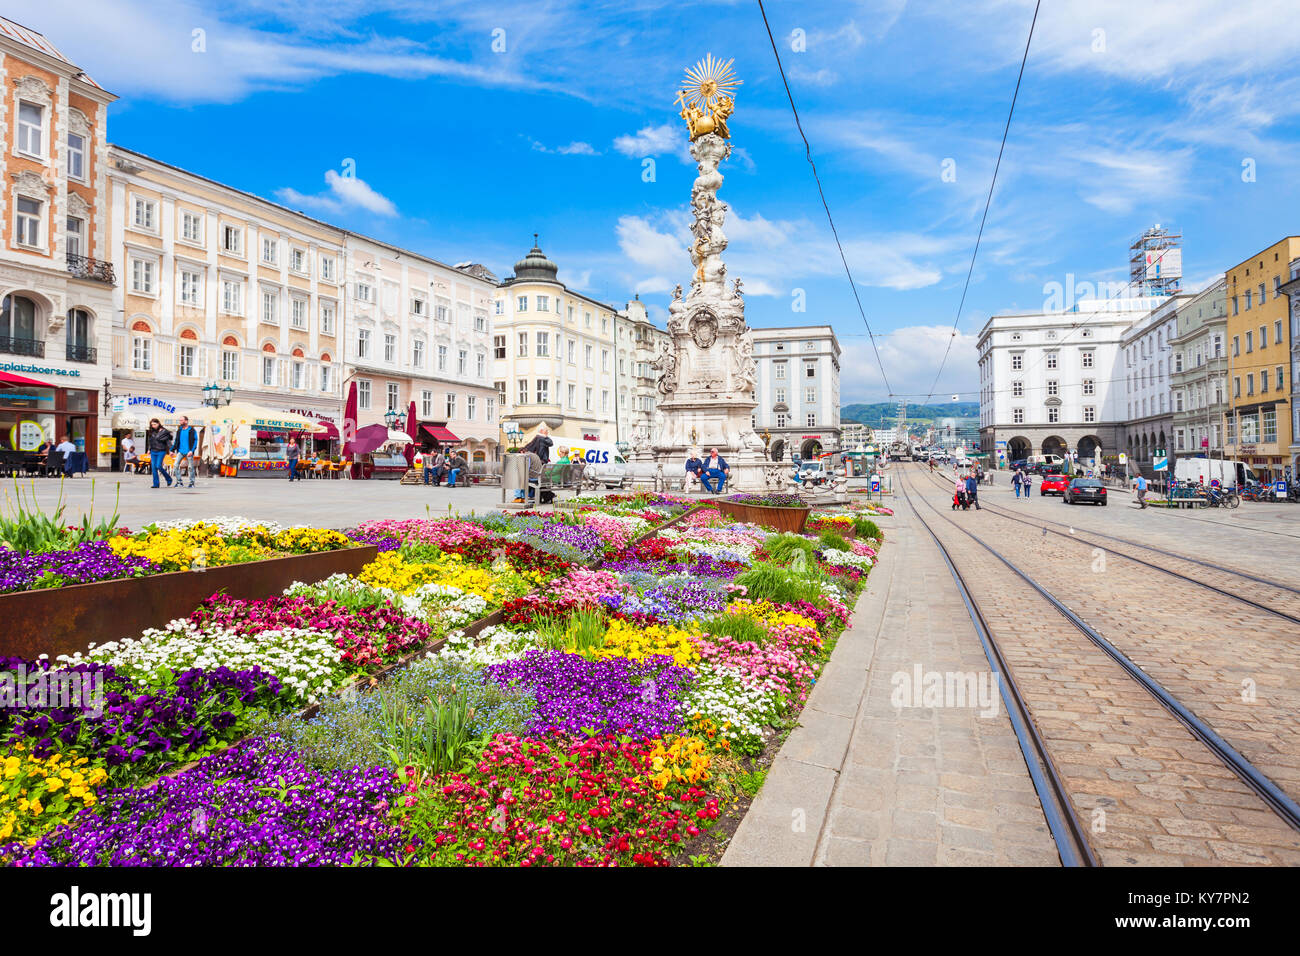 LINZ, AUSTRIA - MAY 15, 2017: Holy Trinity column on the Hauptplatz or main square in the centre of Linz, Austria. Linz is the third largest city of A Stock Photo